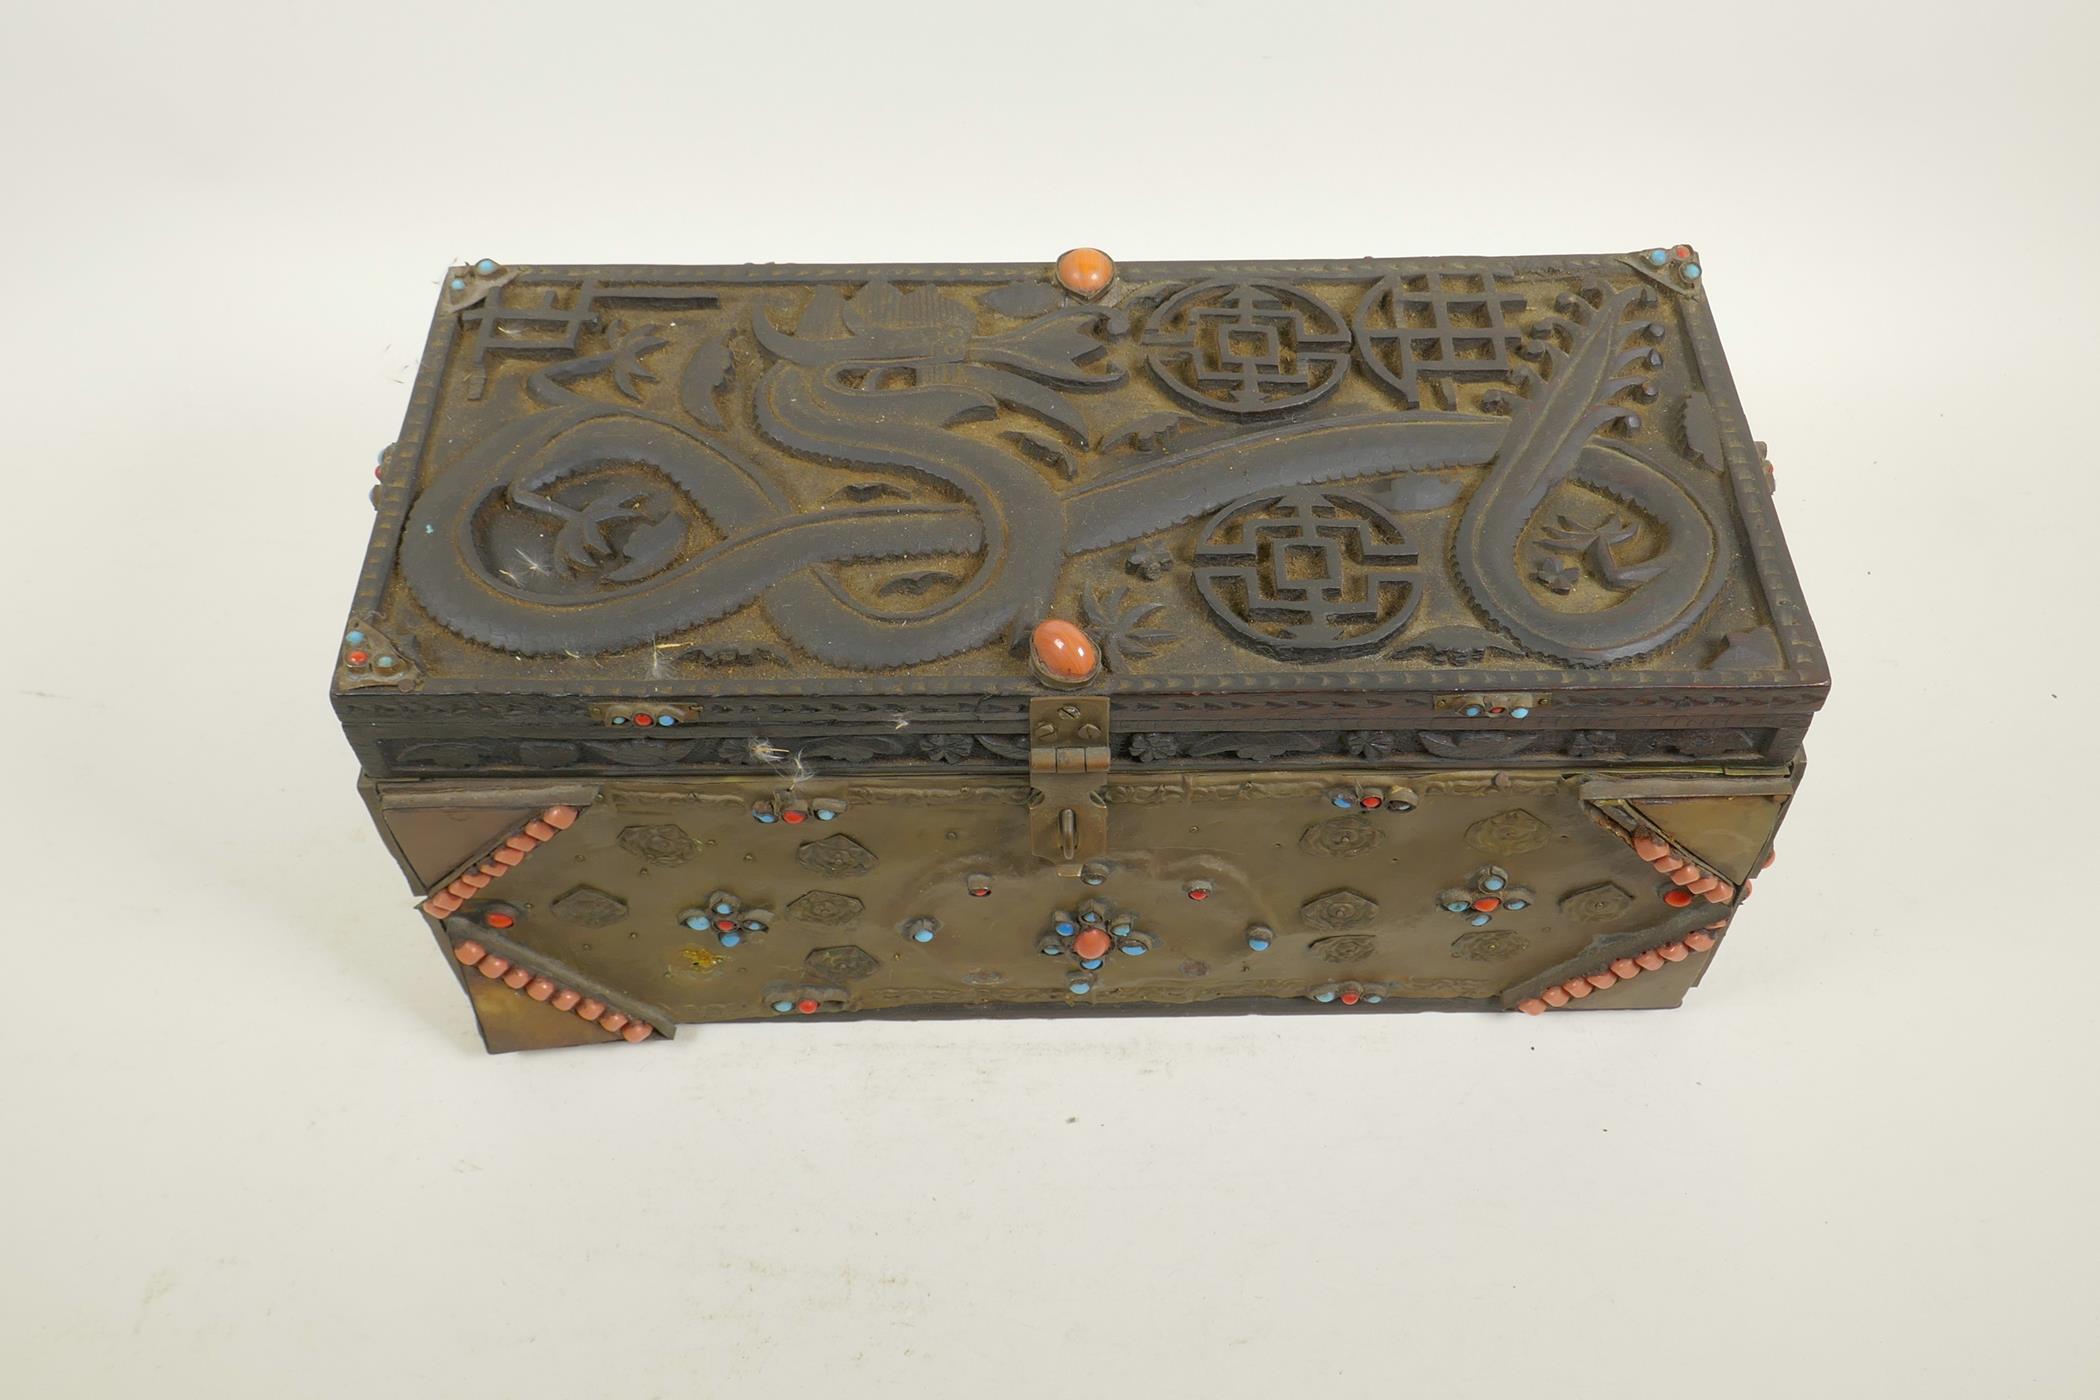 A Sino-Tibetan brass bound carved hardwood casket, with dragon and auspicious symbol decoration, and - Image 2 of 5